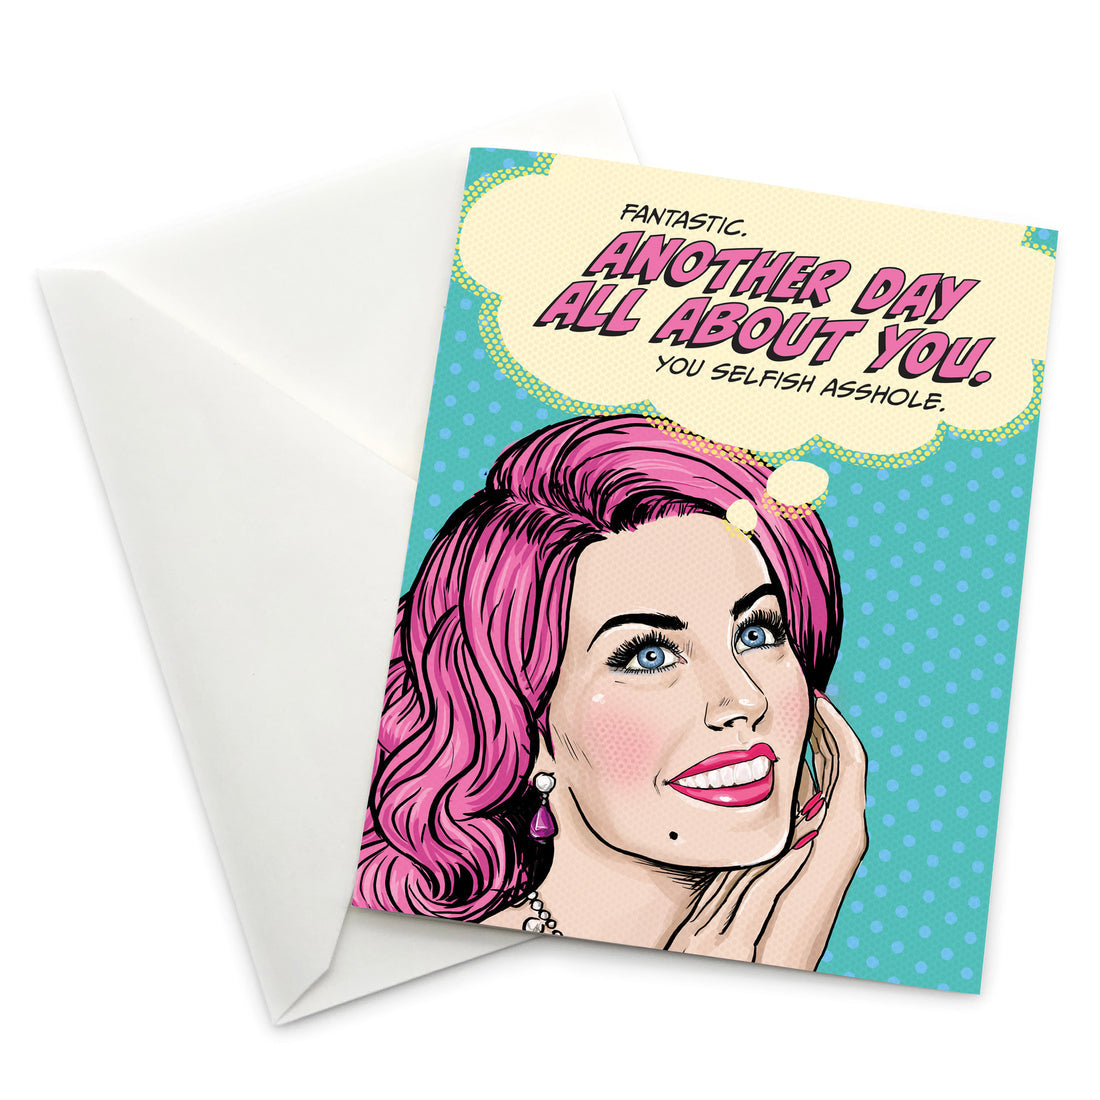 POP LIFE SATIRICAL BIRTHDAY CARD - FANTASTIC ANOTHER DAY ALL ABOUT YOU